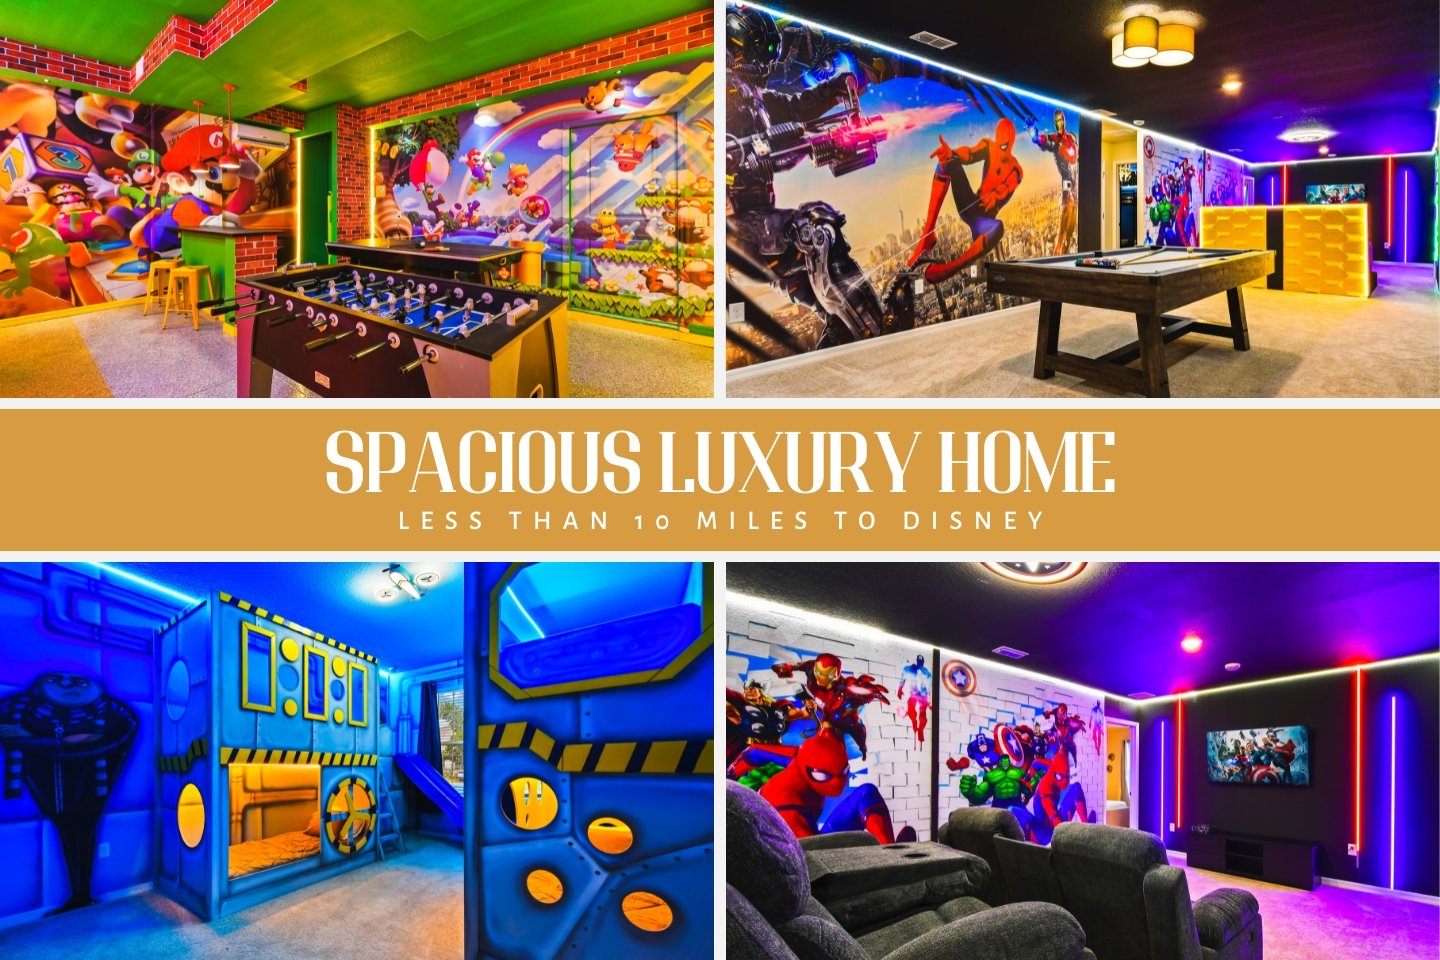 This vibrant space offers an engaging experience with its arcade-style setting filled with colorful lights and themed decor. Perfect for family fun and gaming enthusiasts, it features various game machines and a comfortable seating area.